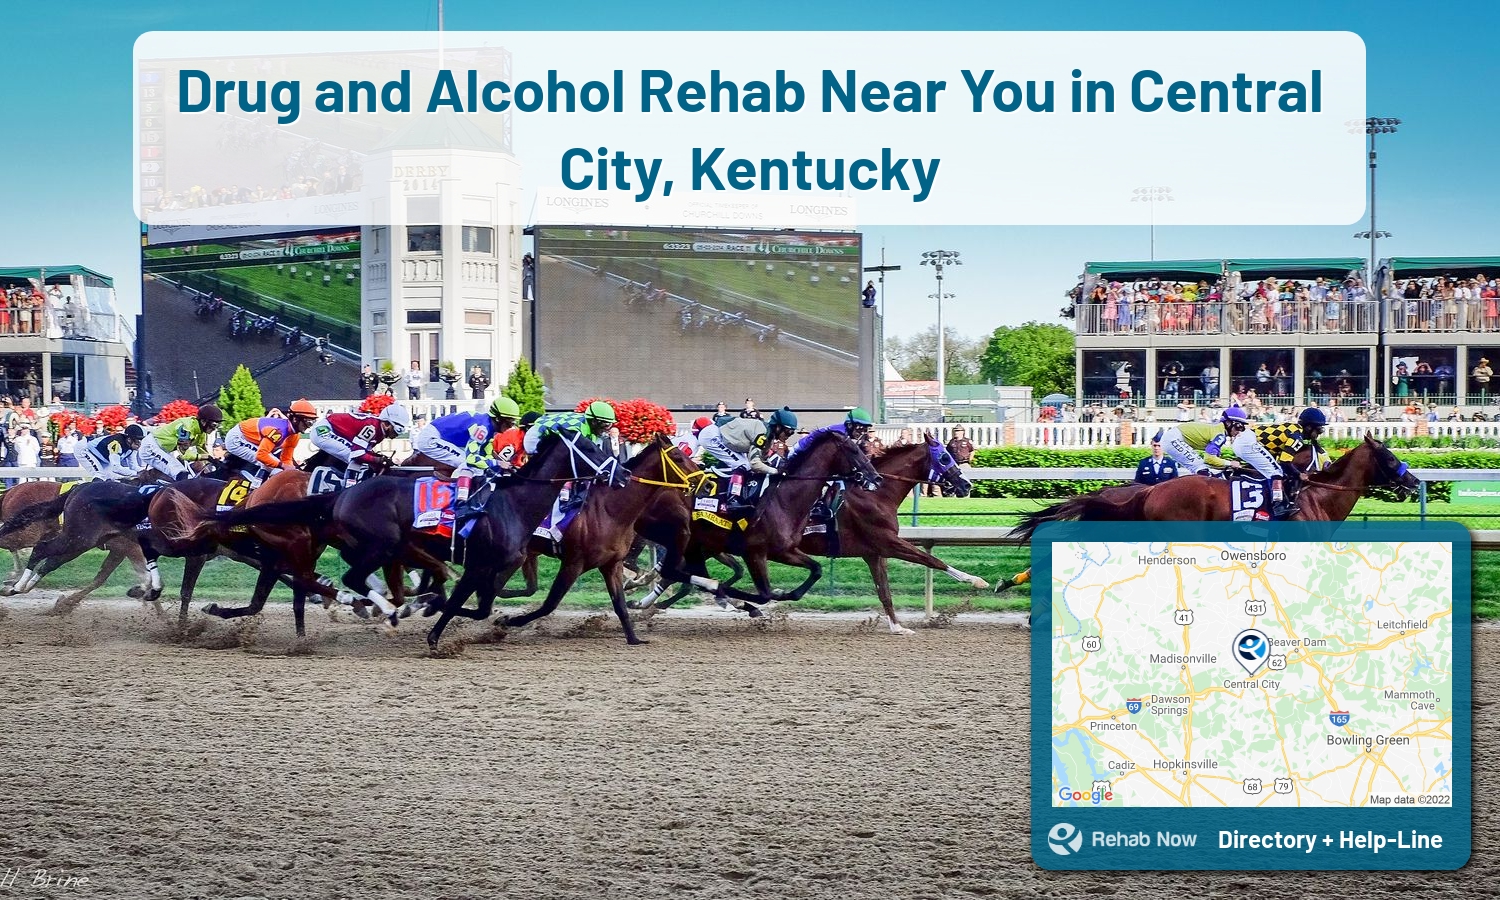 Central City, KY Treatment Centers. Find drug rehab in Central City, Kentucky, or detox and treatment programs. Get the right help now!